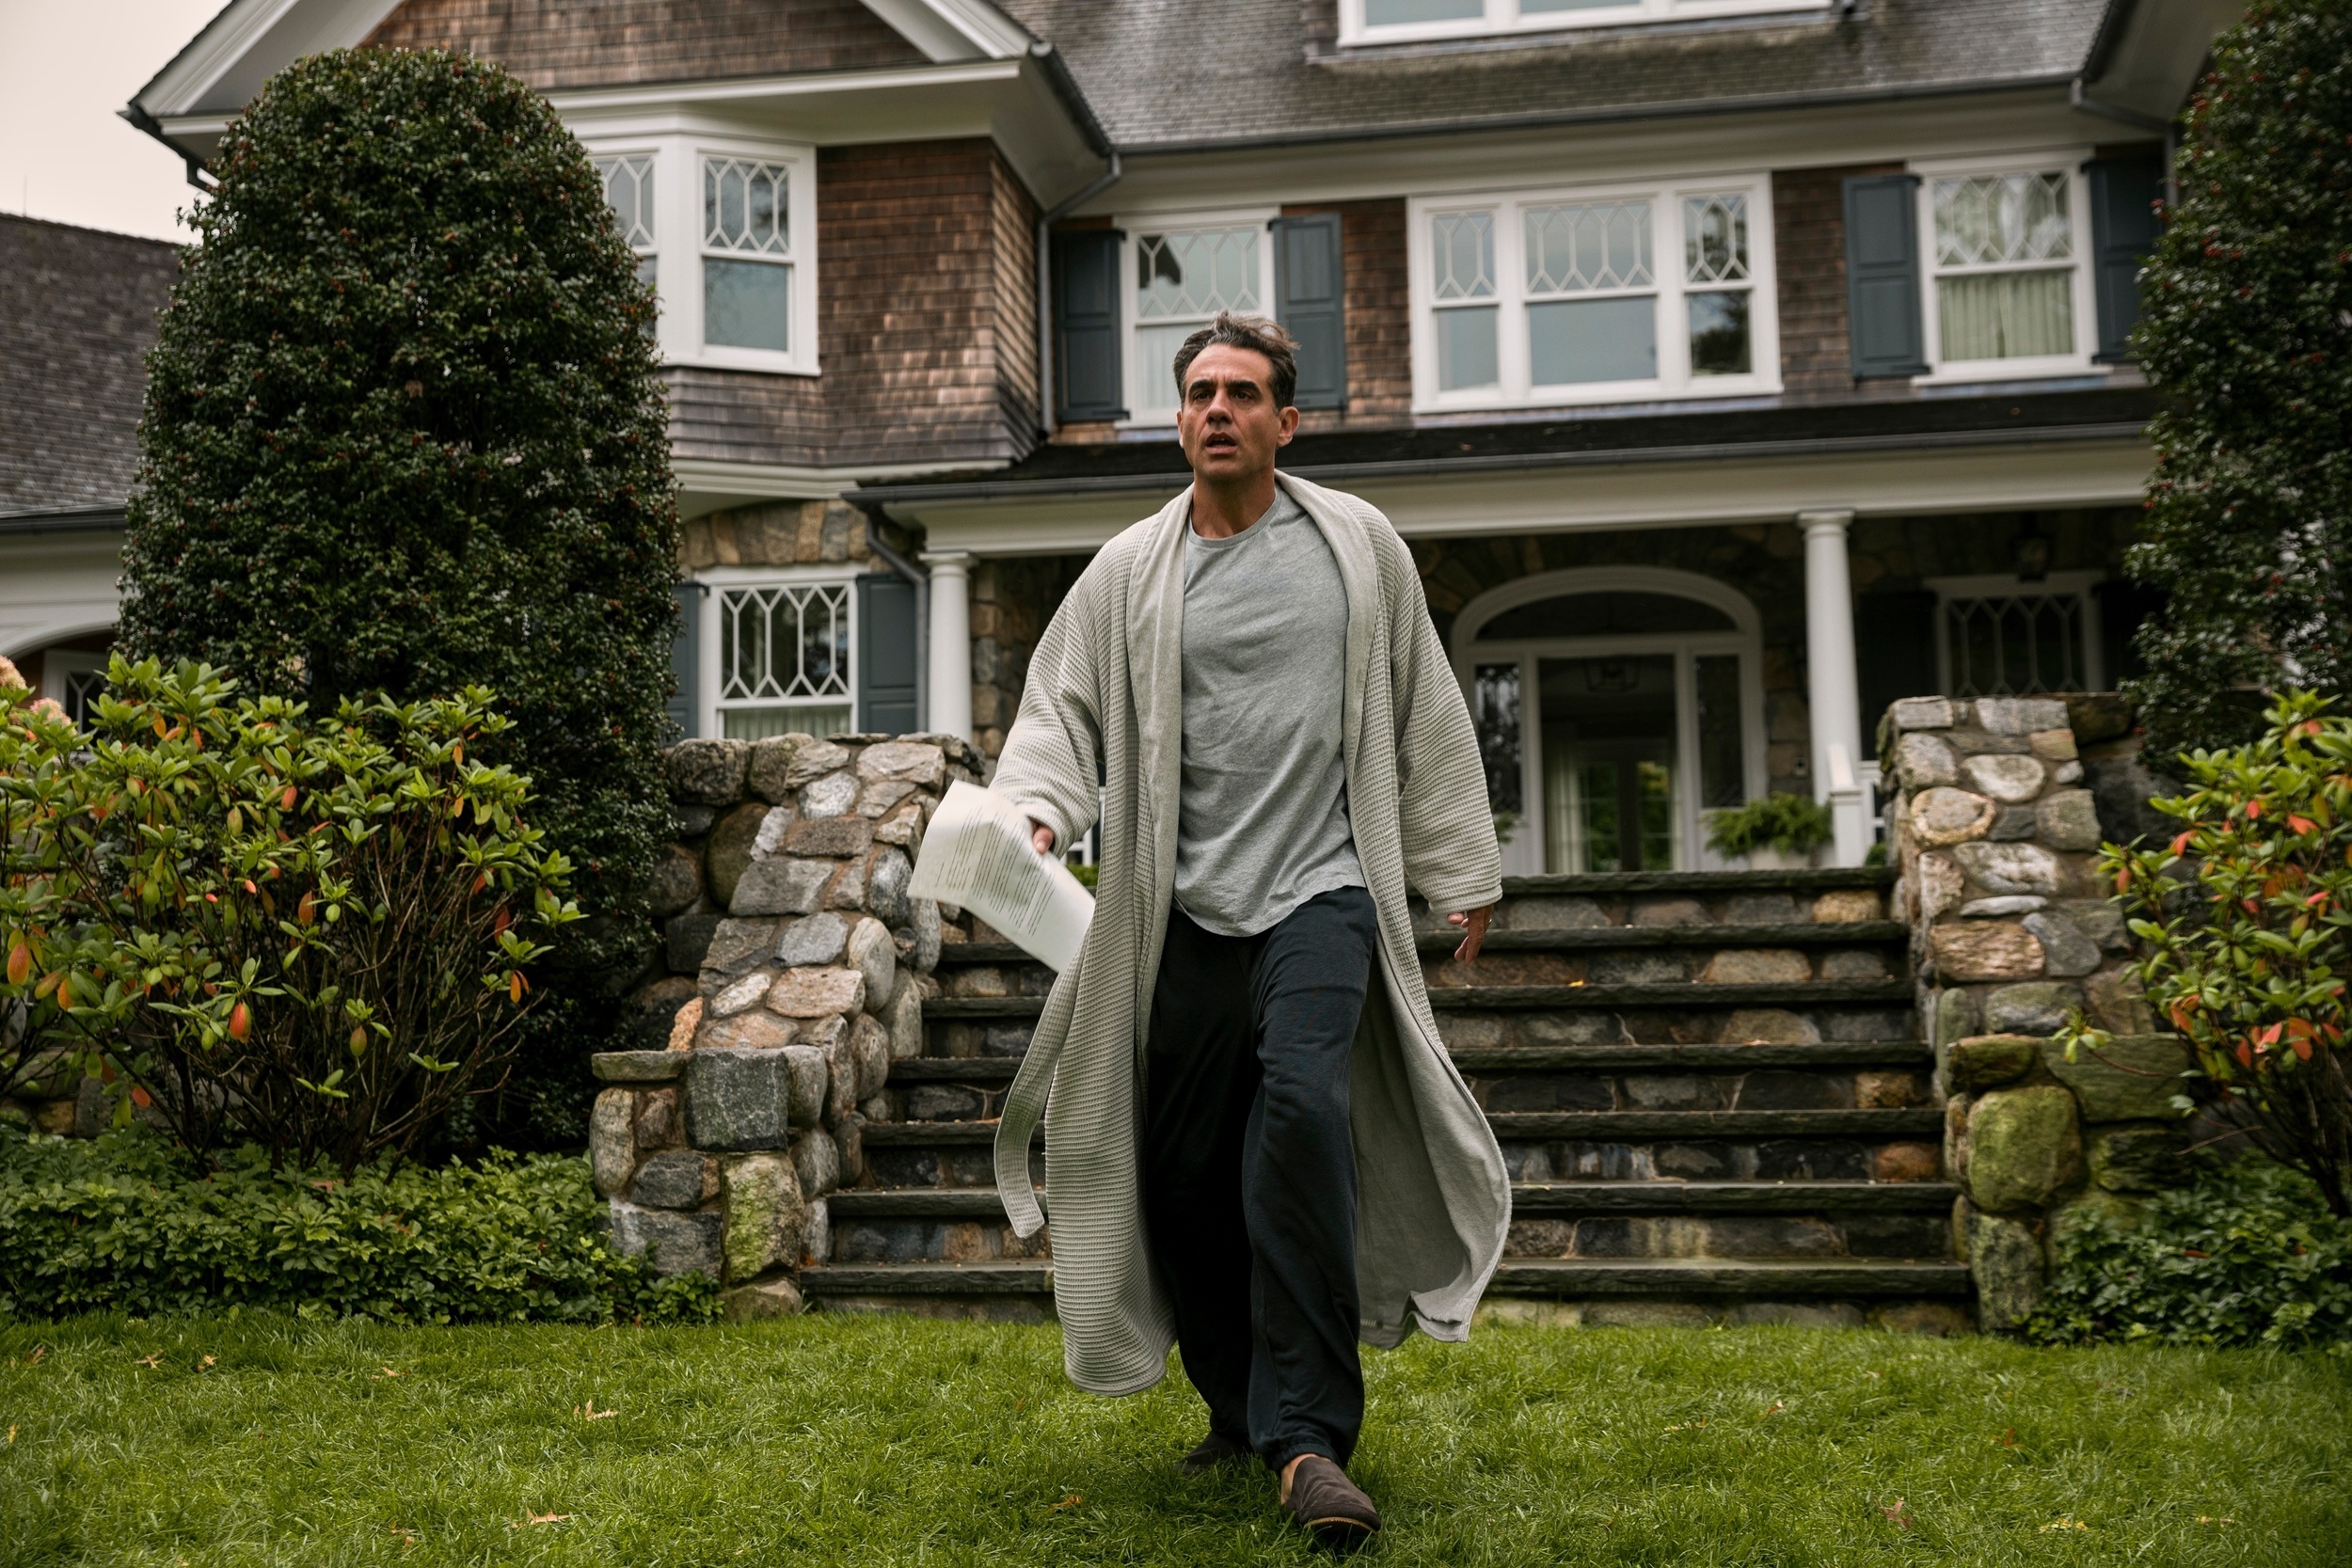 <p>Based on a true story about a family in New Jersey who bought their dream home only to find out that it came with a creepy stalker, this Hulu series stars Jennifer Coolidge, Naomi Watts, and Bobby Cannavale. </p><p>You may also like: <a href='https://www.yardbarker.com/entertainment/articles/notable_tv_characters_we_never_saw_on_screen_040424/s1__29454812'>Notable TV characters we never saw on screen</a></p>